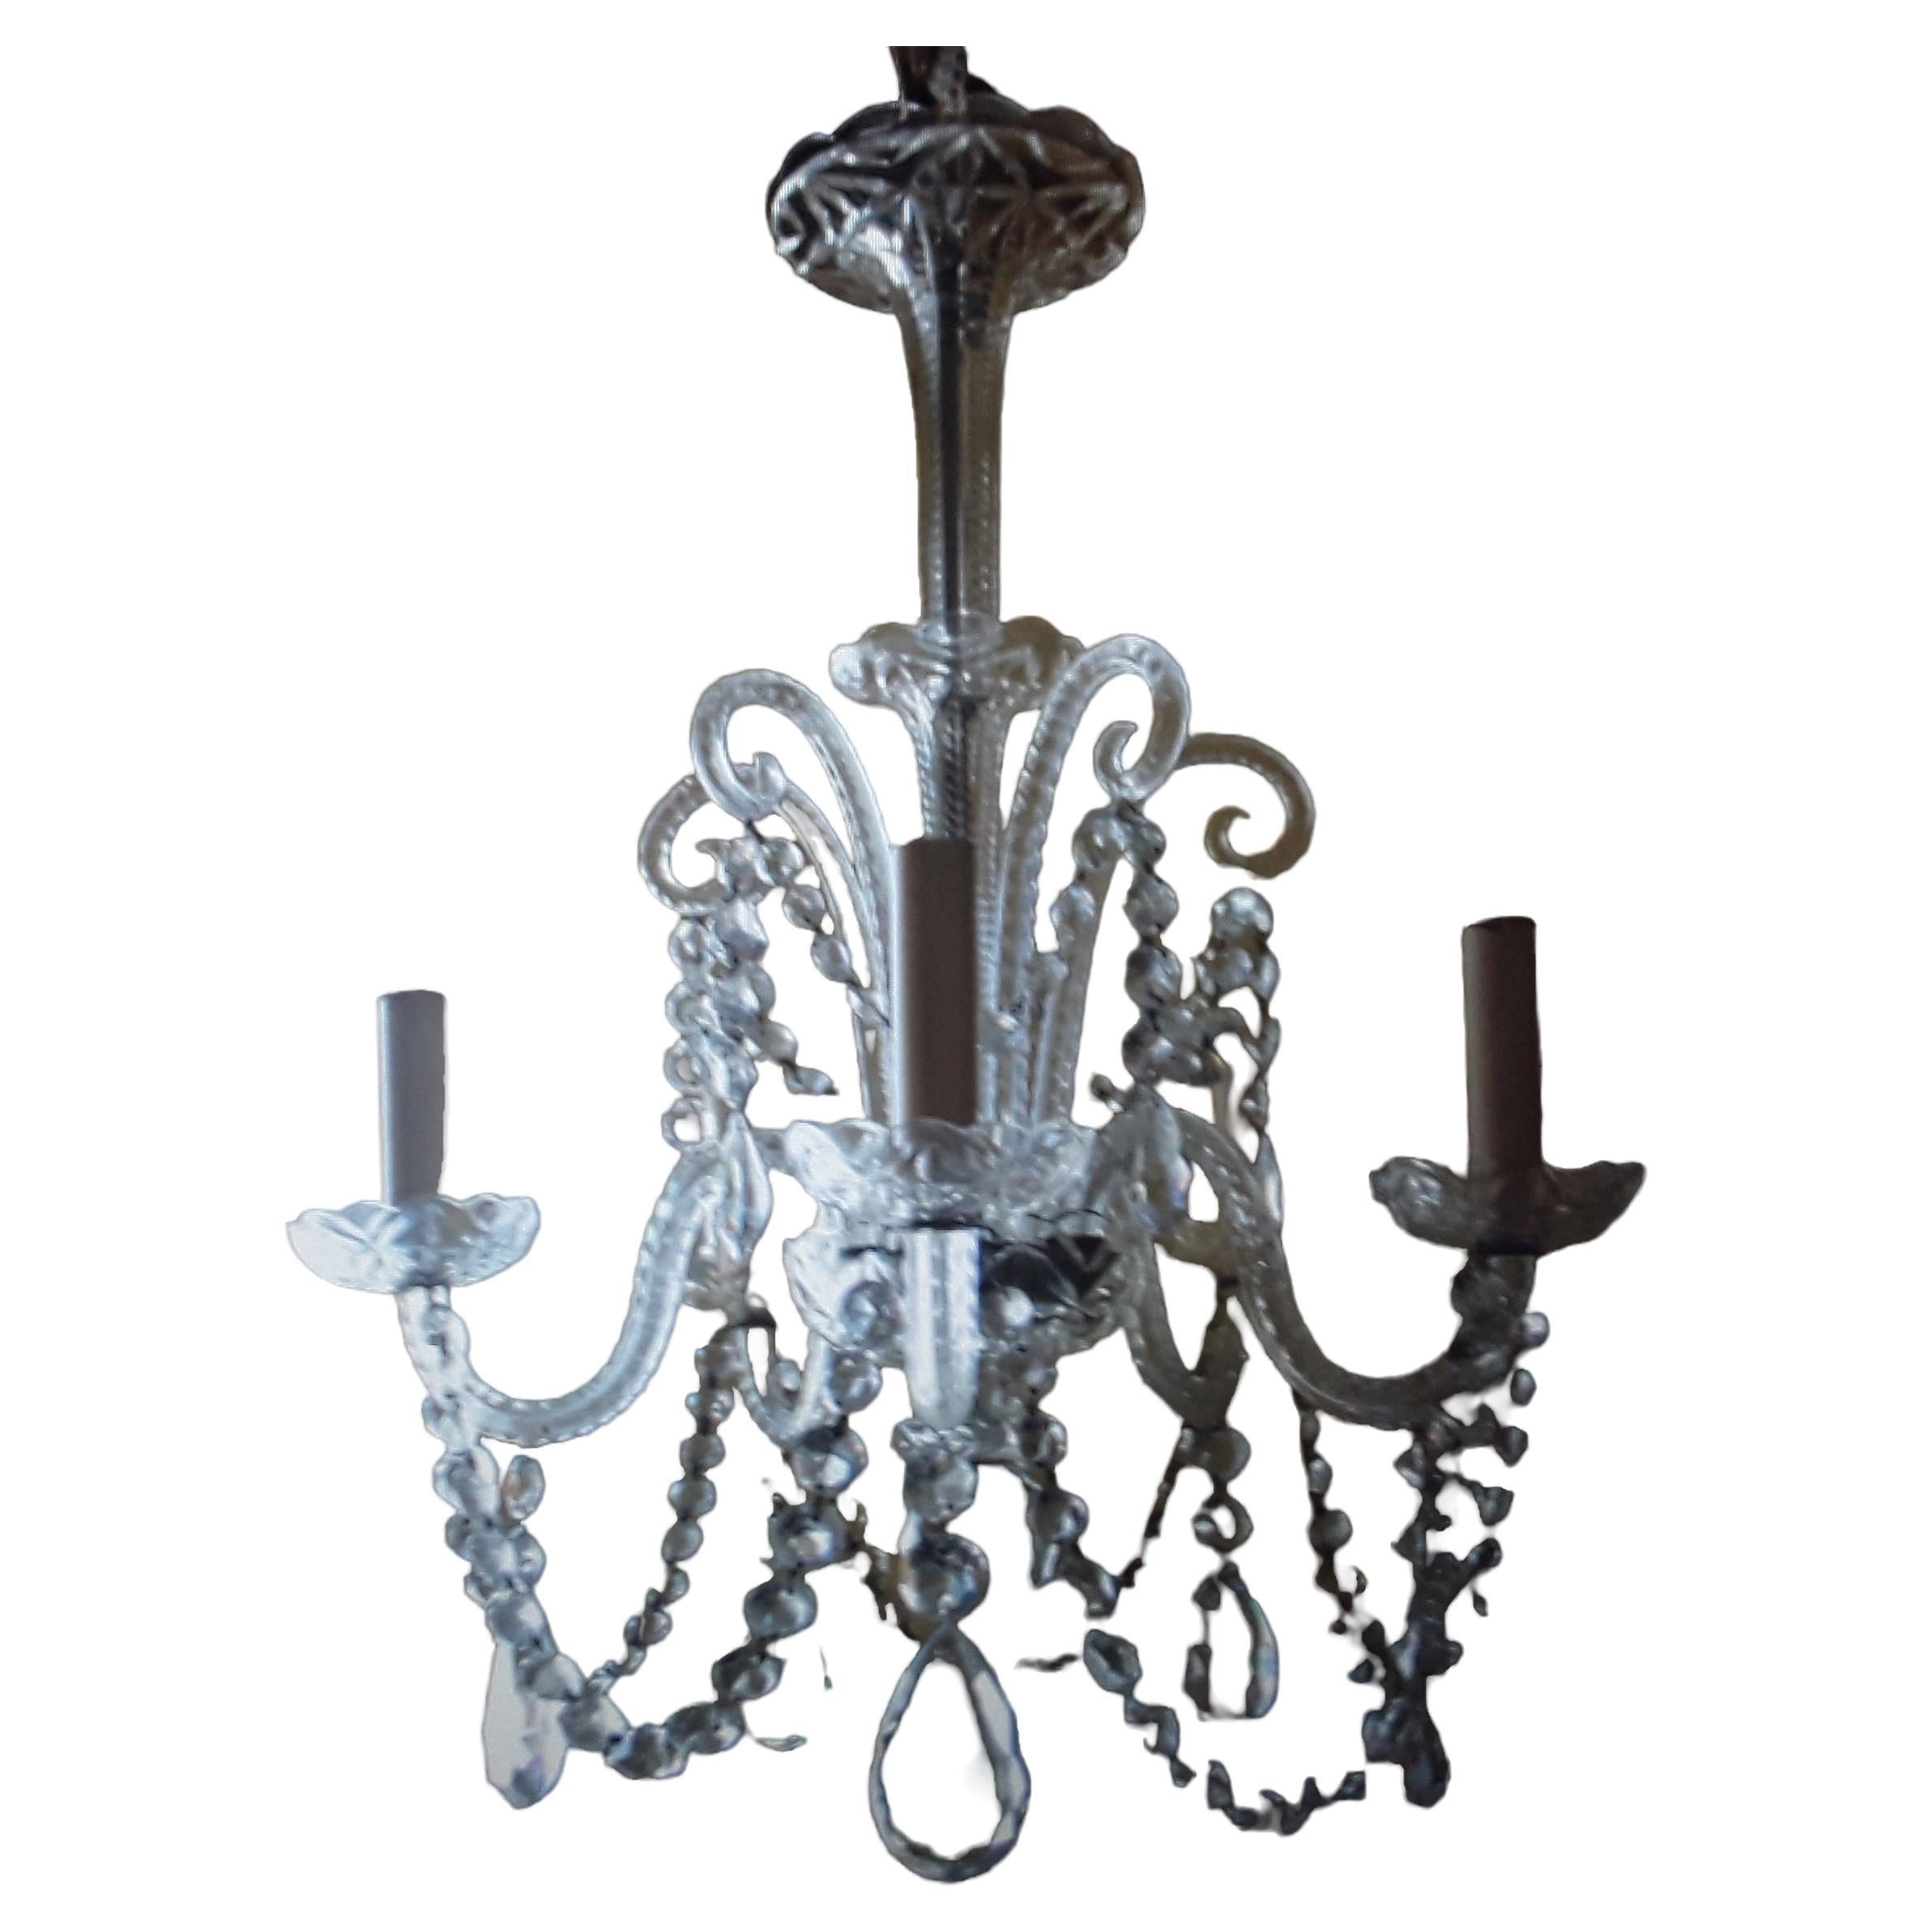 c1890-1900 Antique Anglo-Irish Traditional Cut Leaded Crystal Chandelier For Sale